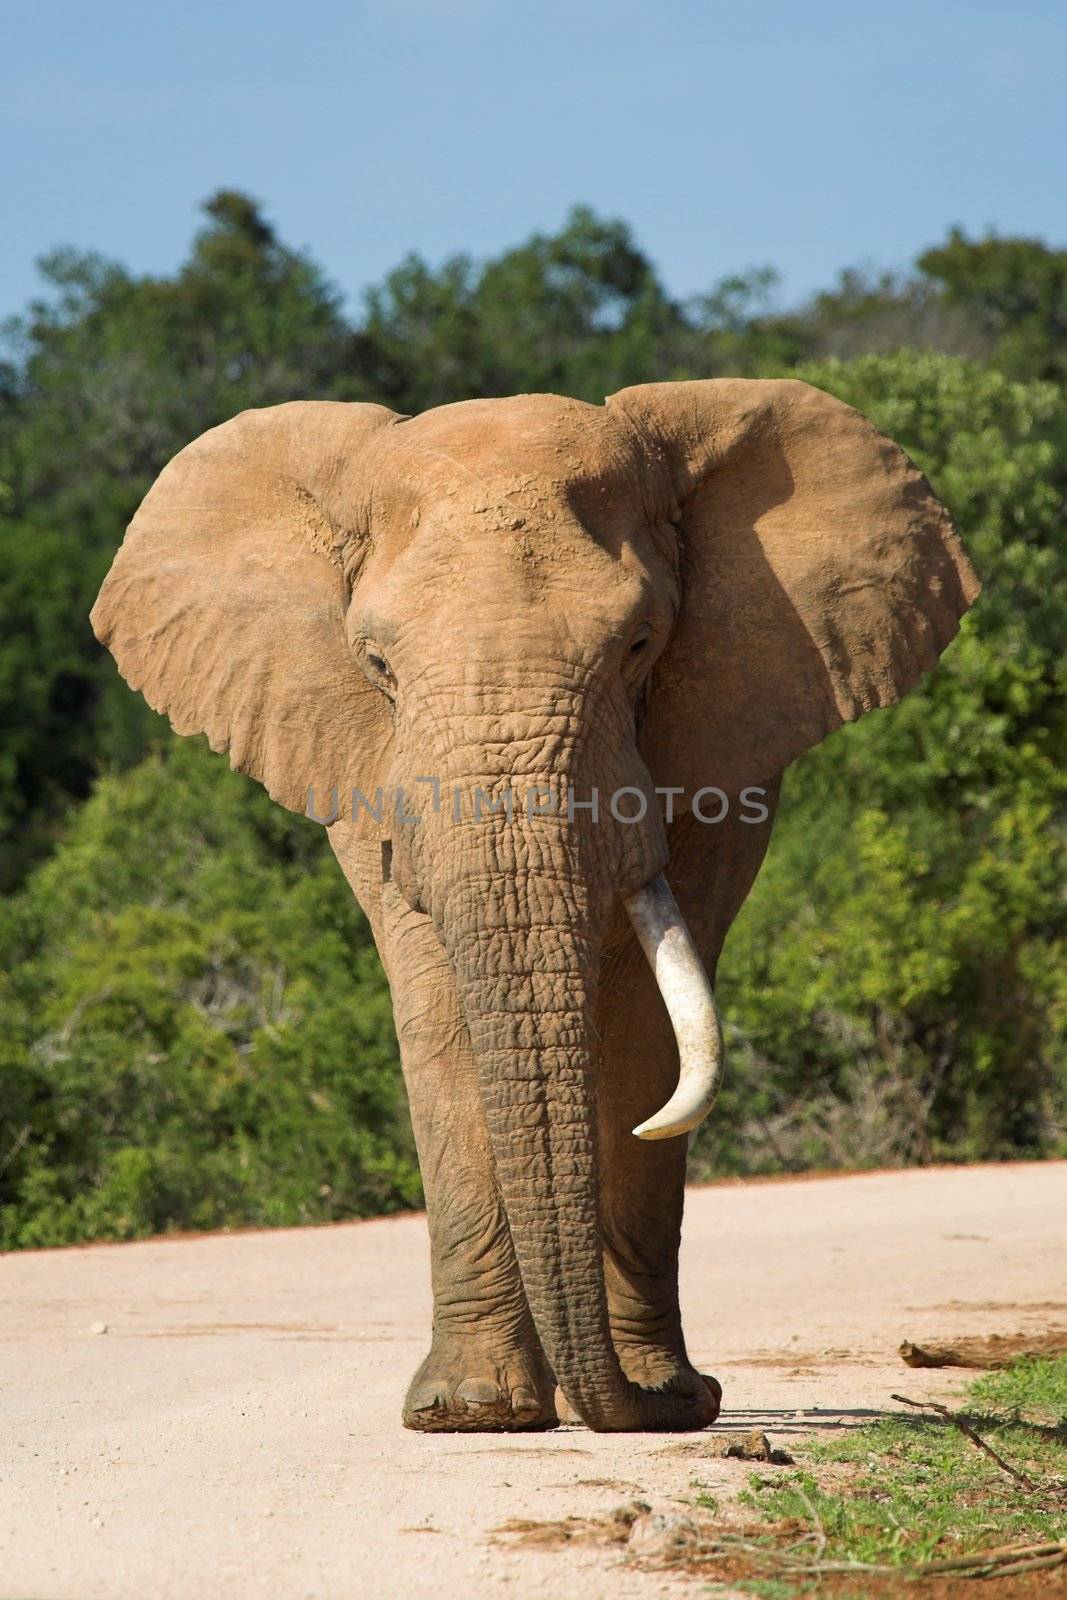 African Elephant with one tusk walking down the road